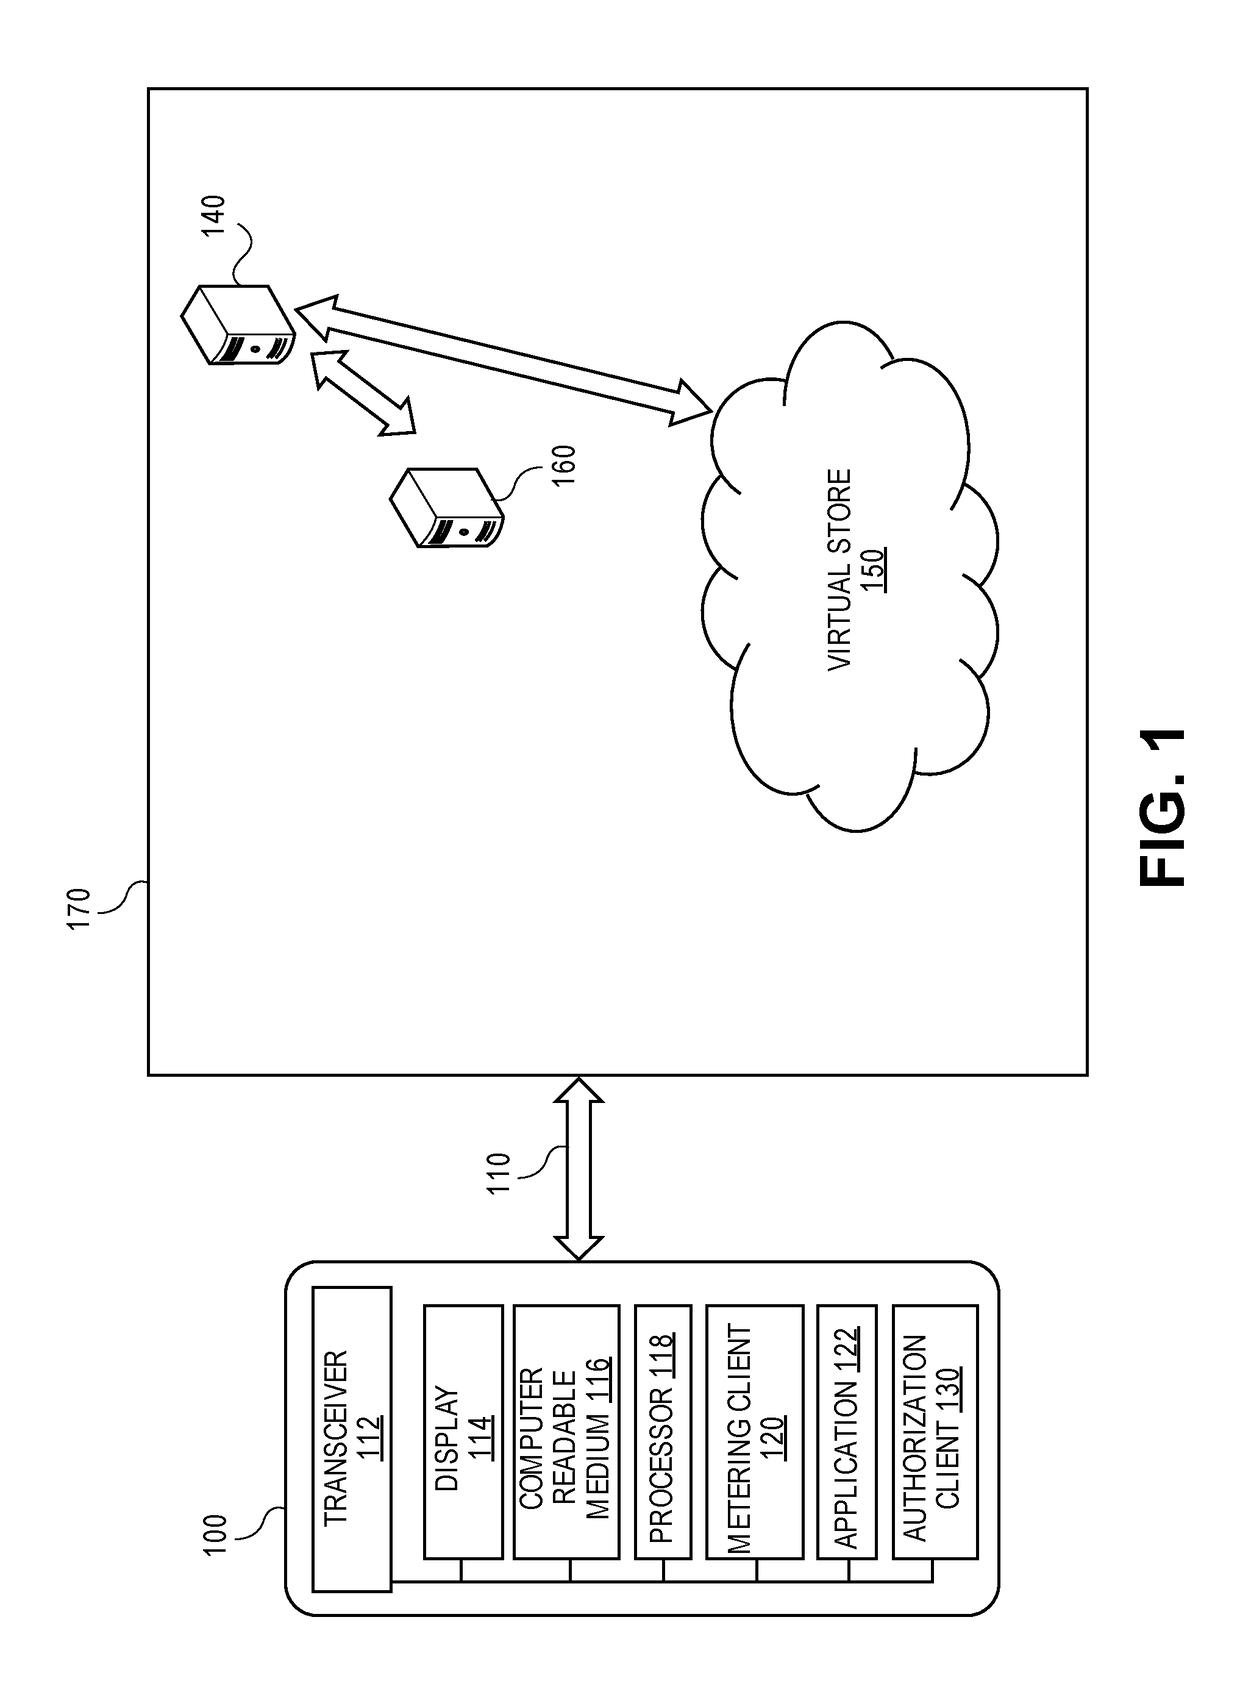 System and method of securely supporting one or more virtual application sources on a wireless device